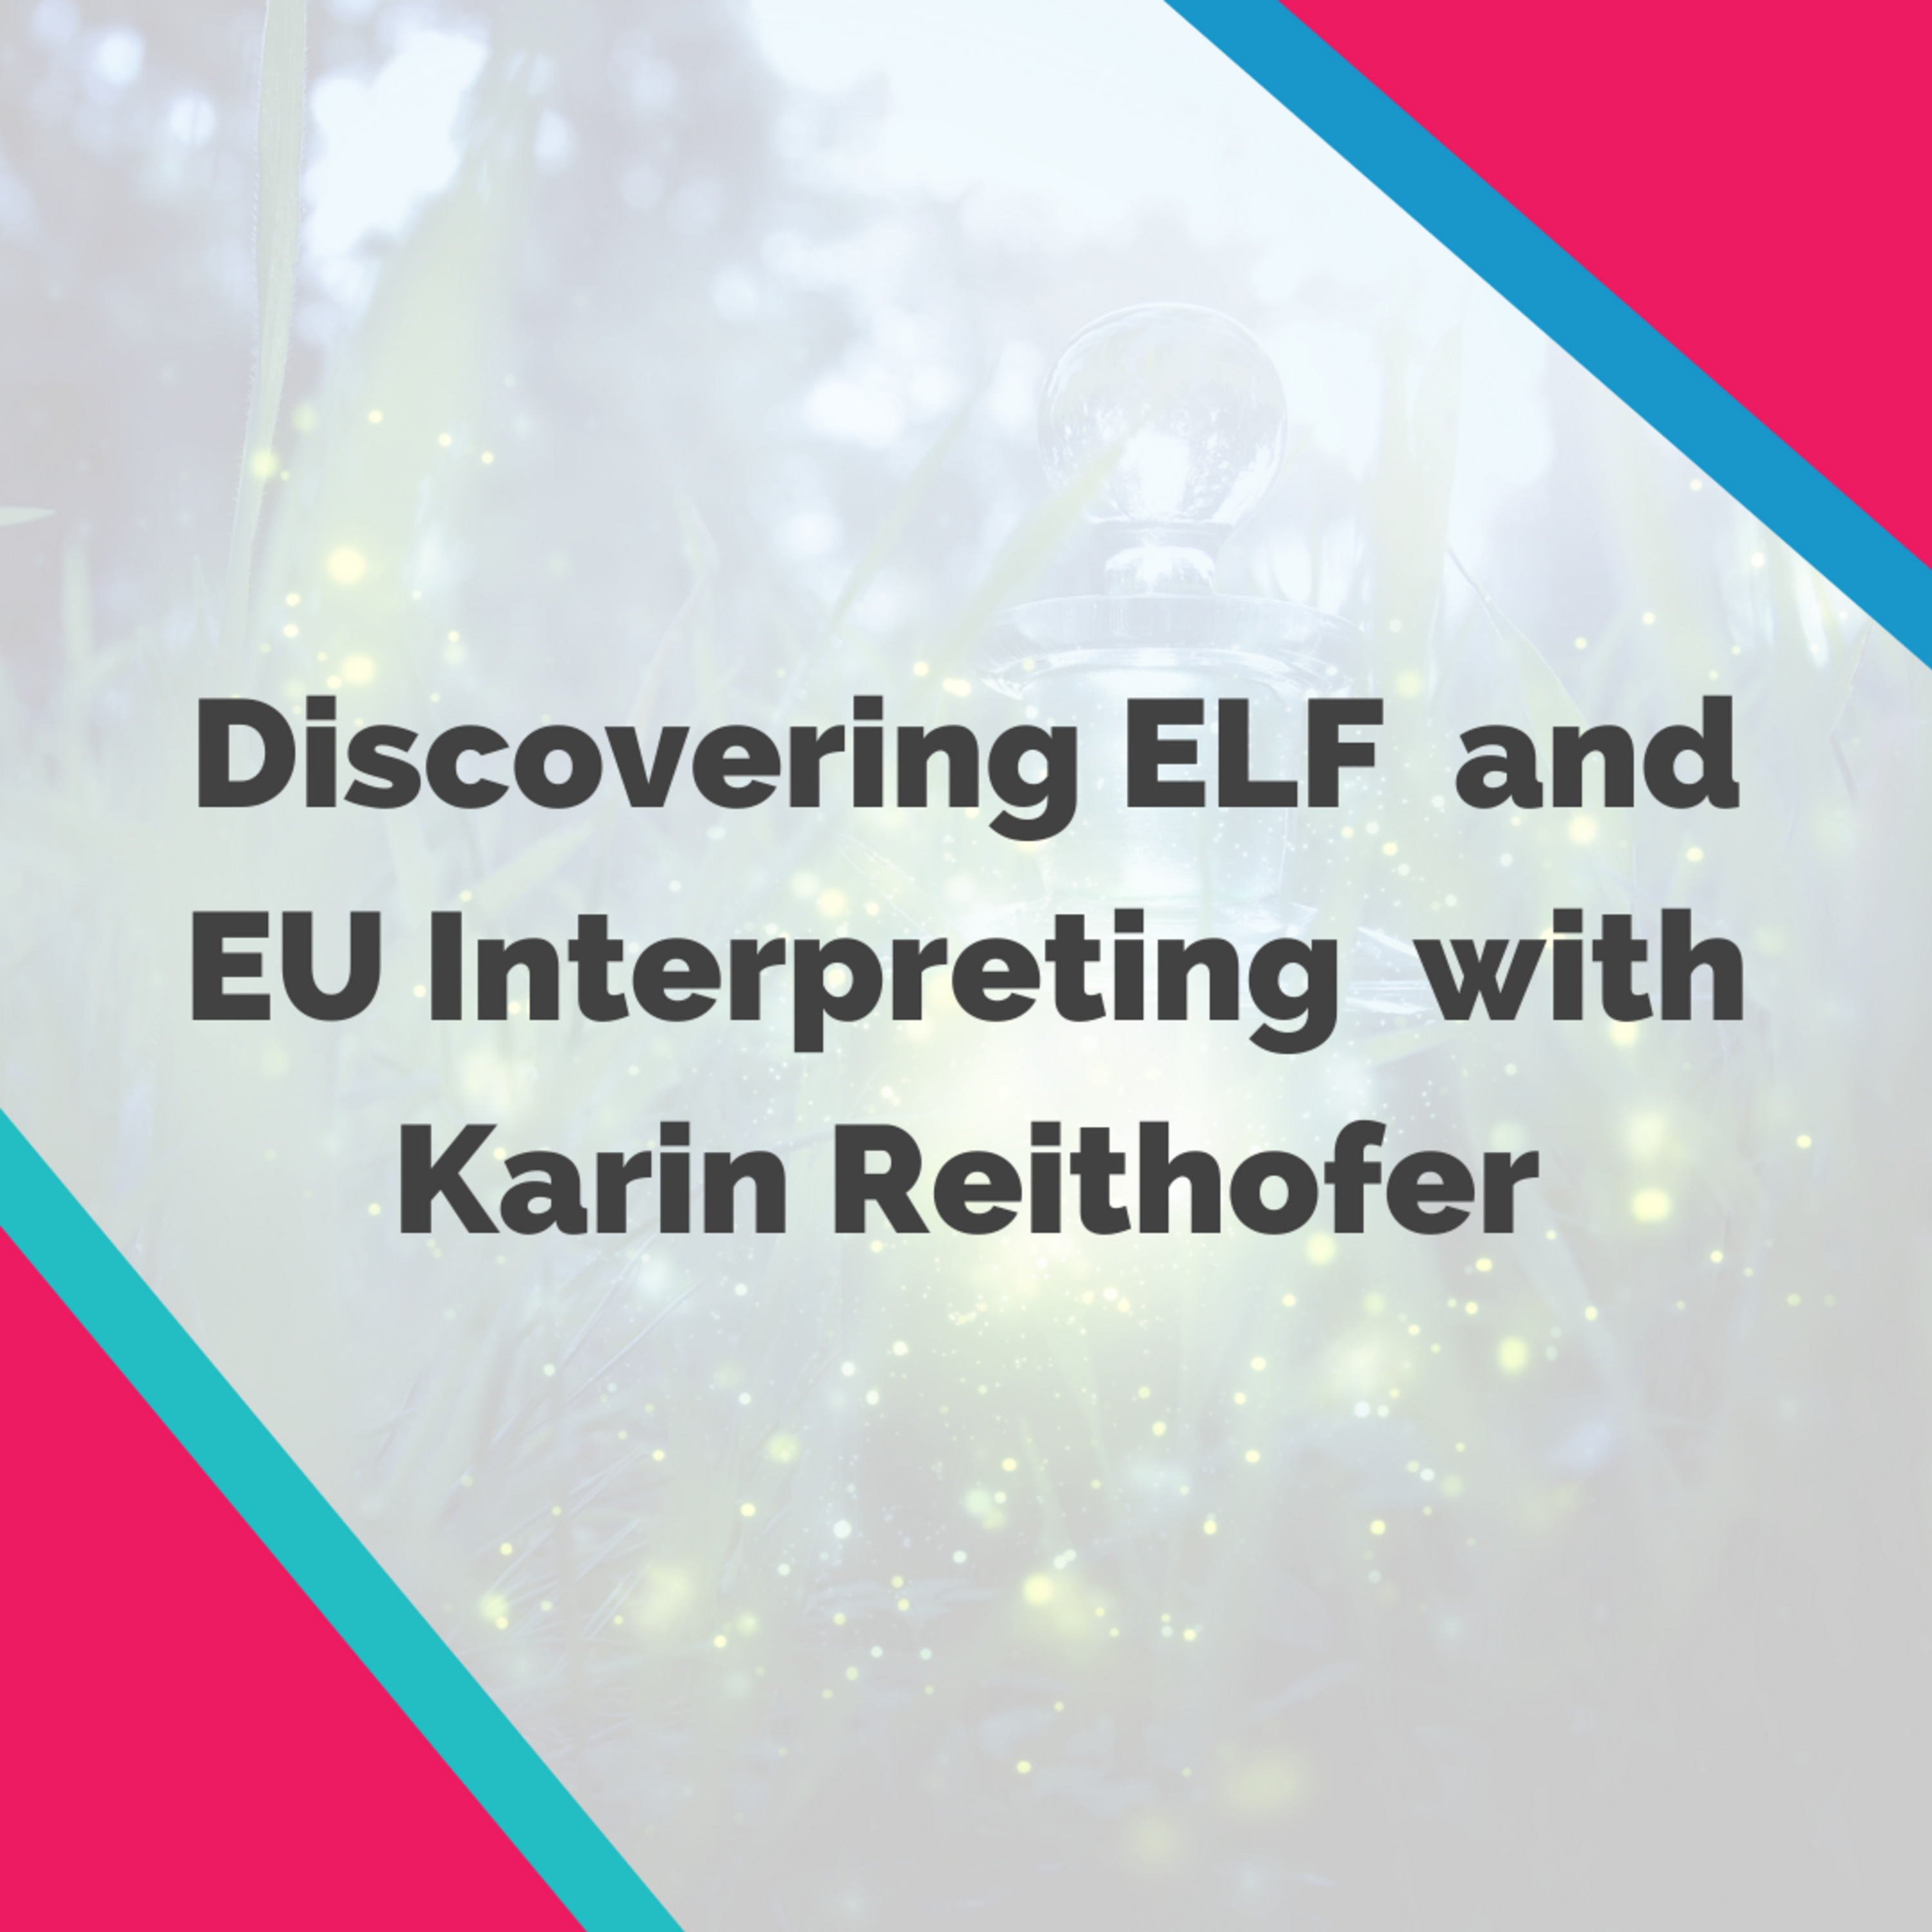 Bilingual Episode (German and English): Discovering ELF 🧝🏼 and EU Interpreting 🇪🇺 with Karin Reithofer